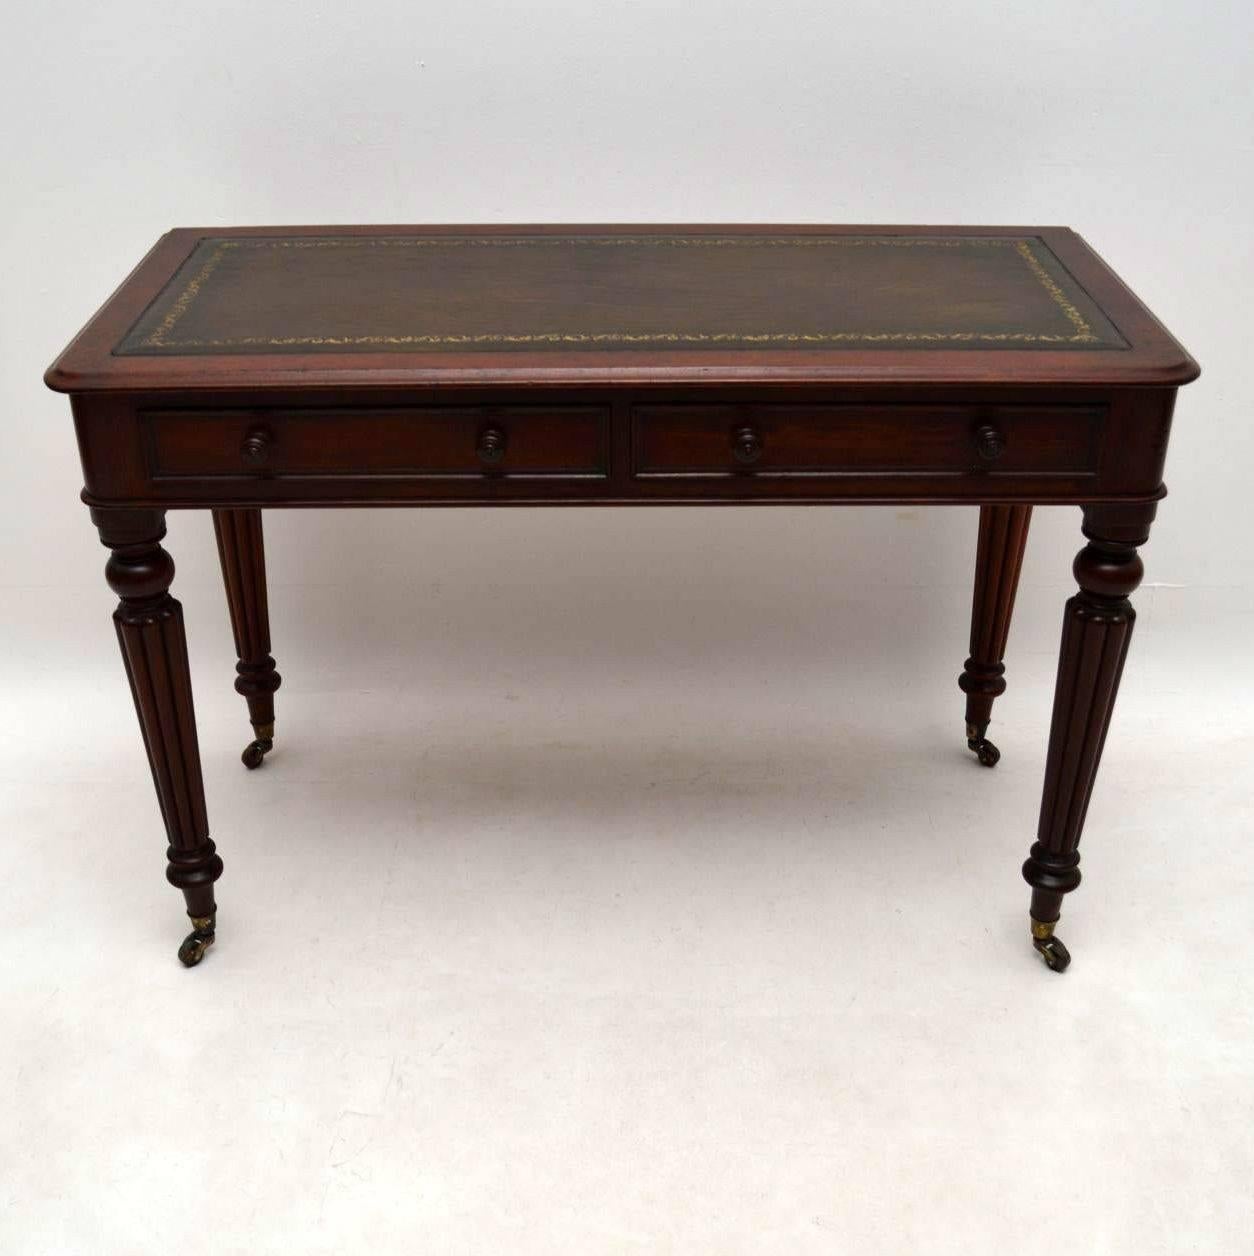 Fine quality early Victorian writing table from the 1840s-1860s period with plenty of character and many nice details. It has a tooled leather writing surface and two drawers below with turned mahogany handles and fine dovetails. It sits on turned